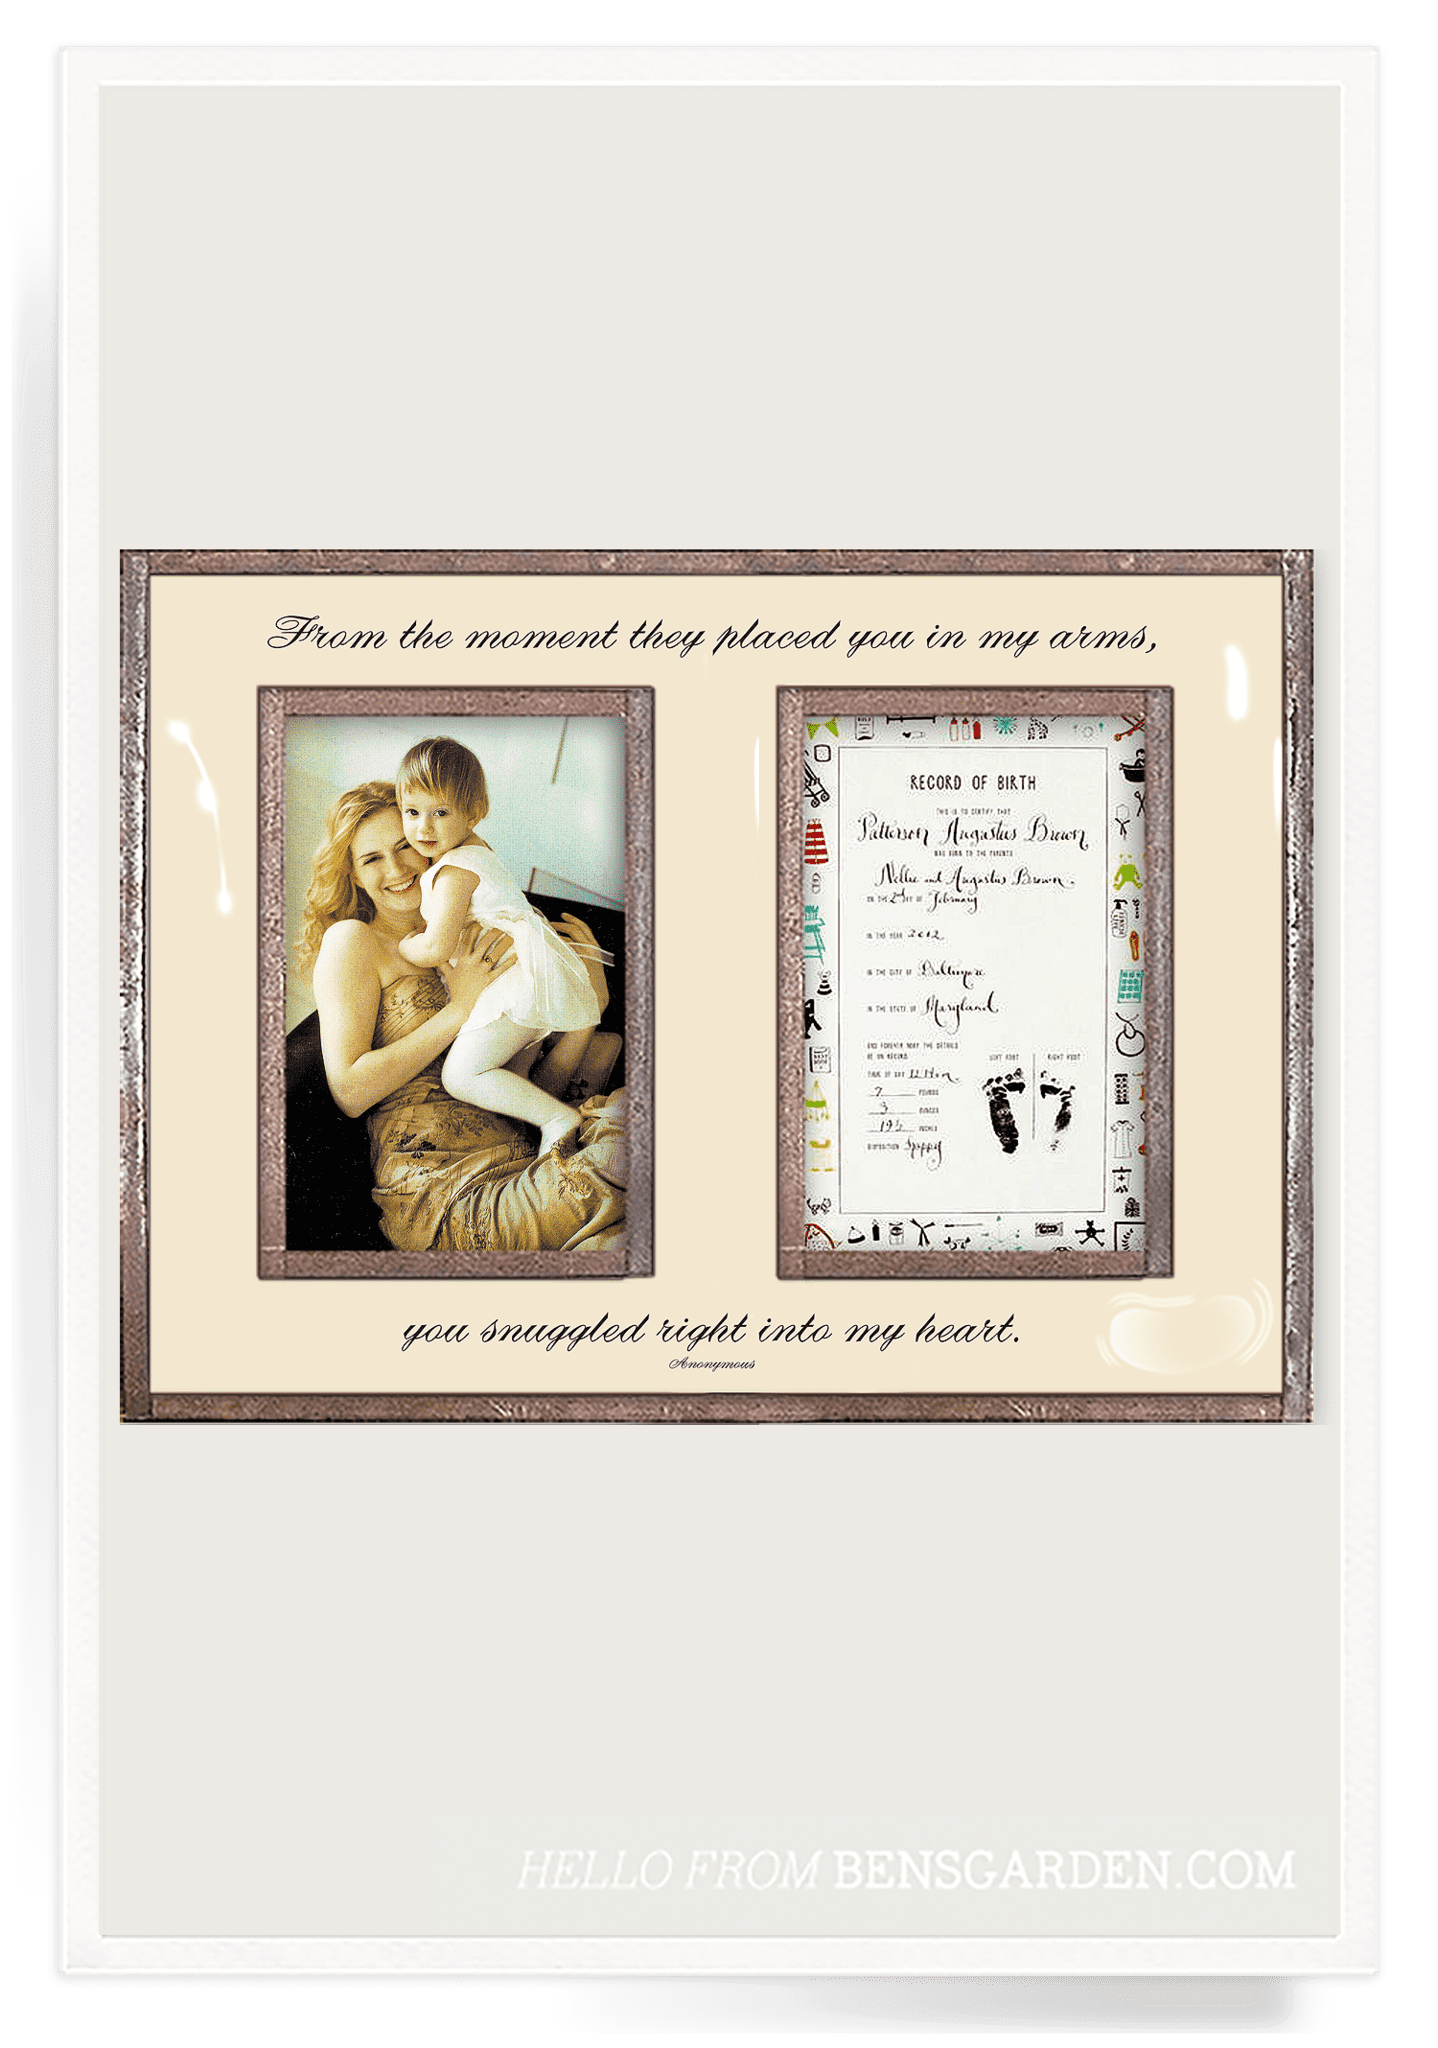 Bensgarden.com | From The Moment They Placed You Double 5"x 7" Copper & Glass Photo Frame - Ben's Garden. Made in New York City.